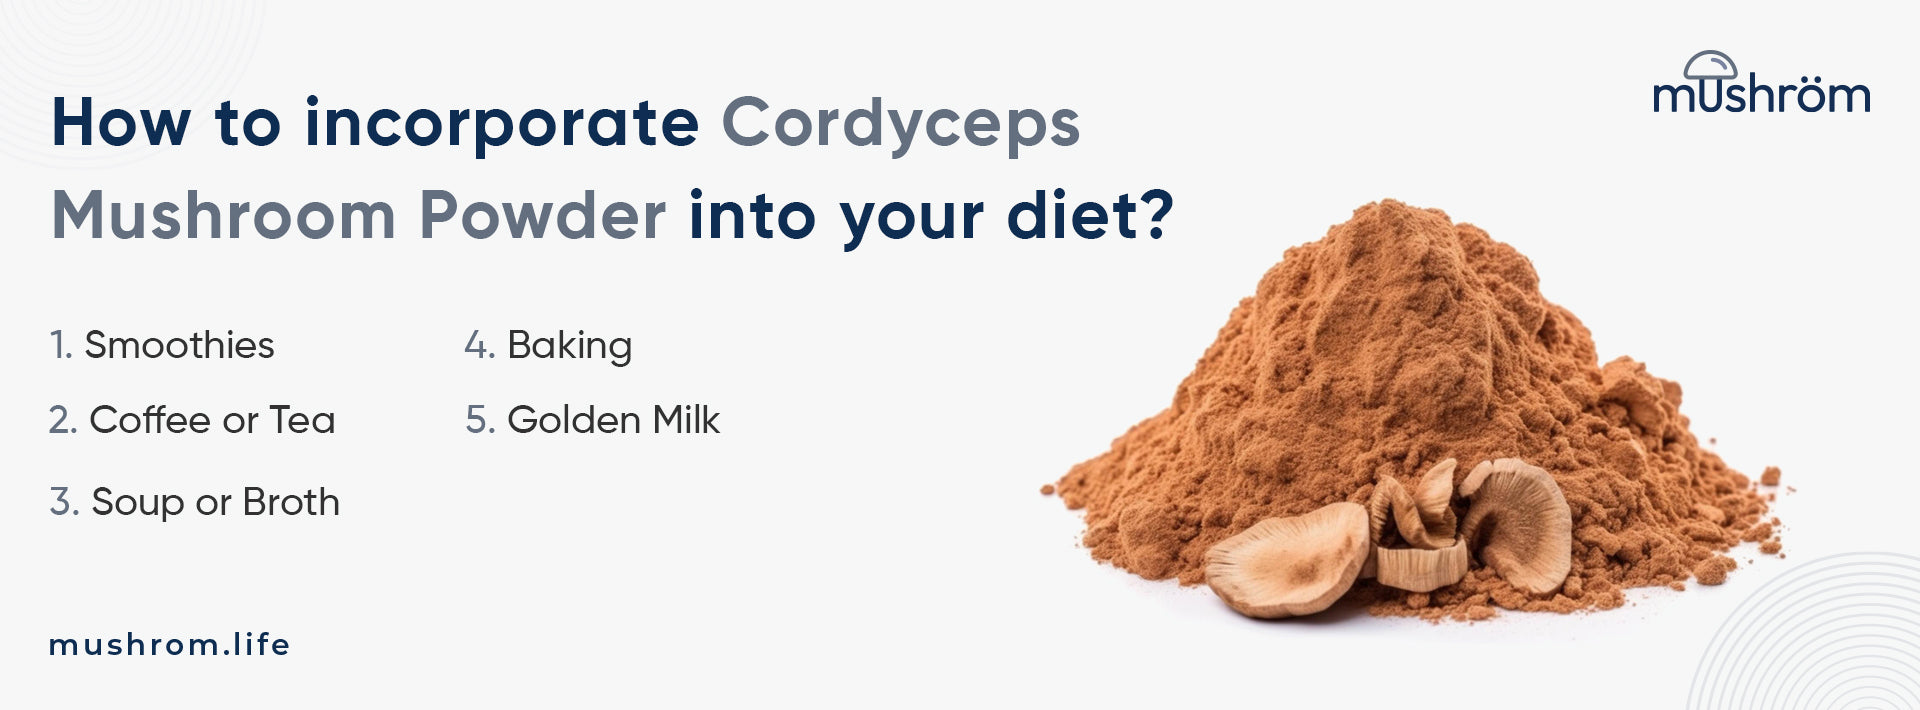 How to incorporate Cordyceps Mushroom Powder into your diet